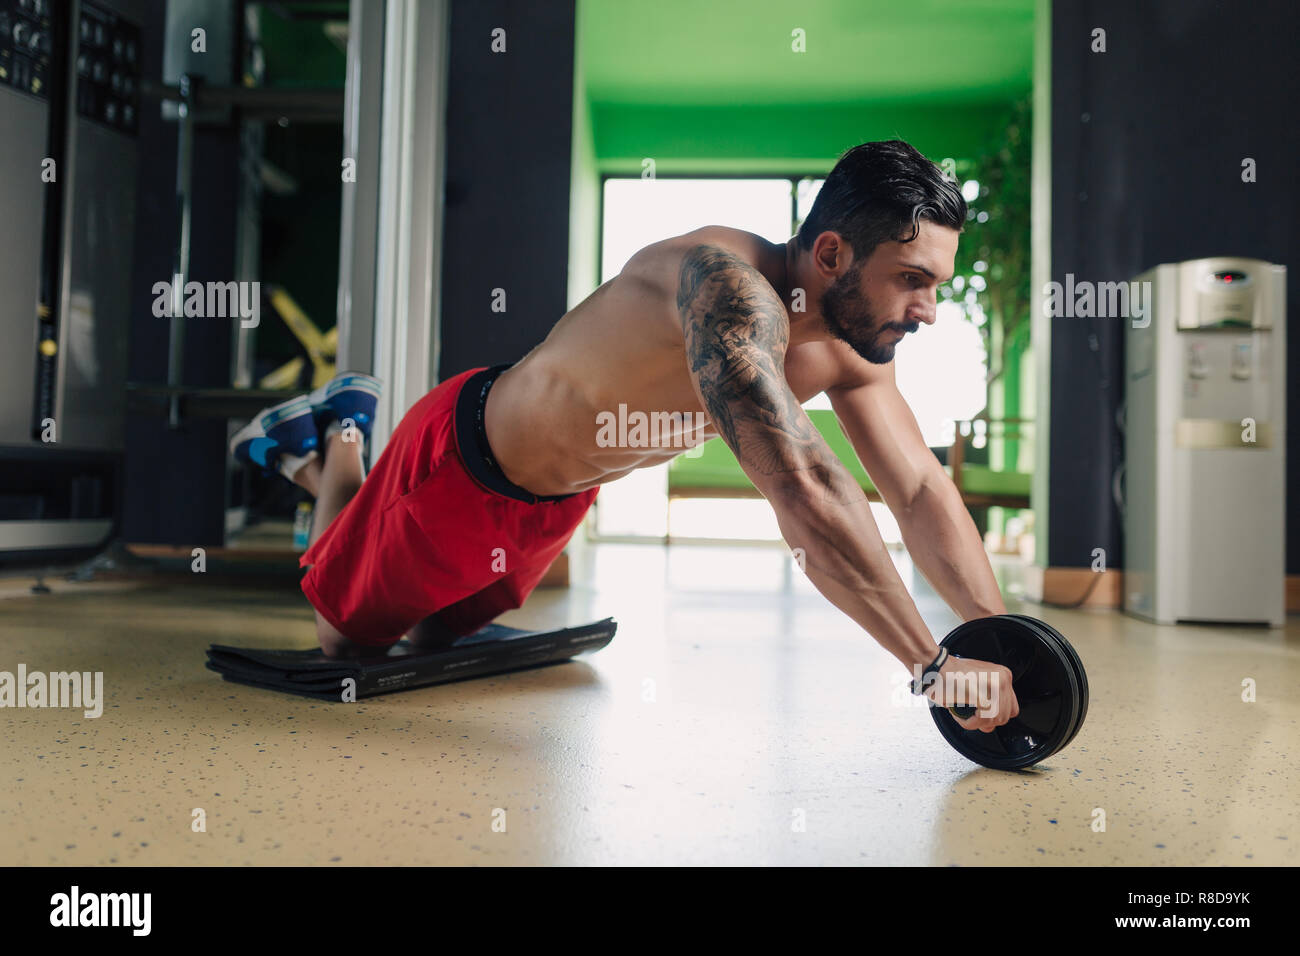 Strong man in the gym doing abs exercise Stock Photo